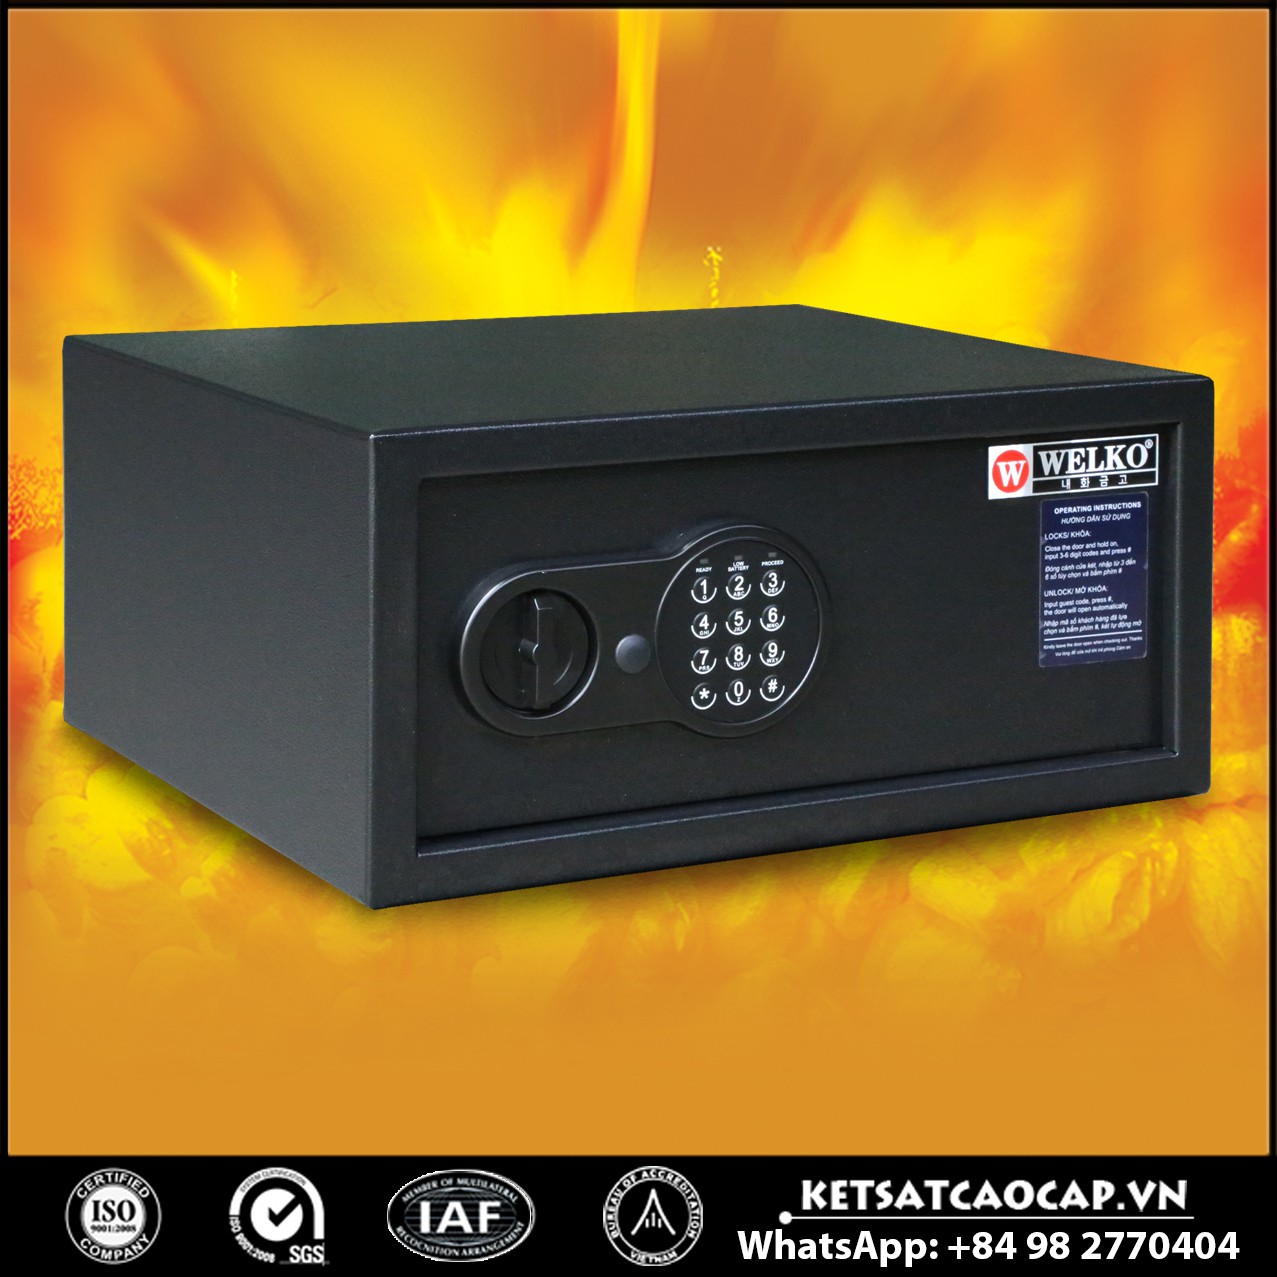 Safe in Hotel Manufacturers